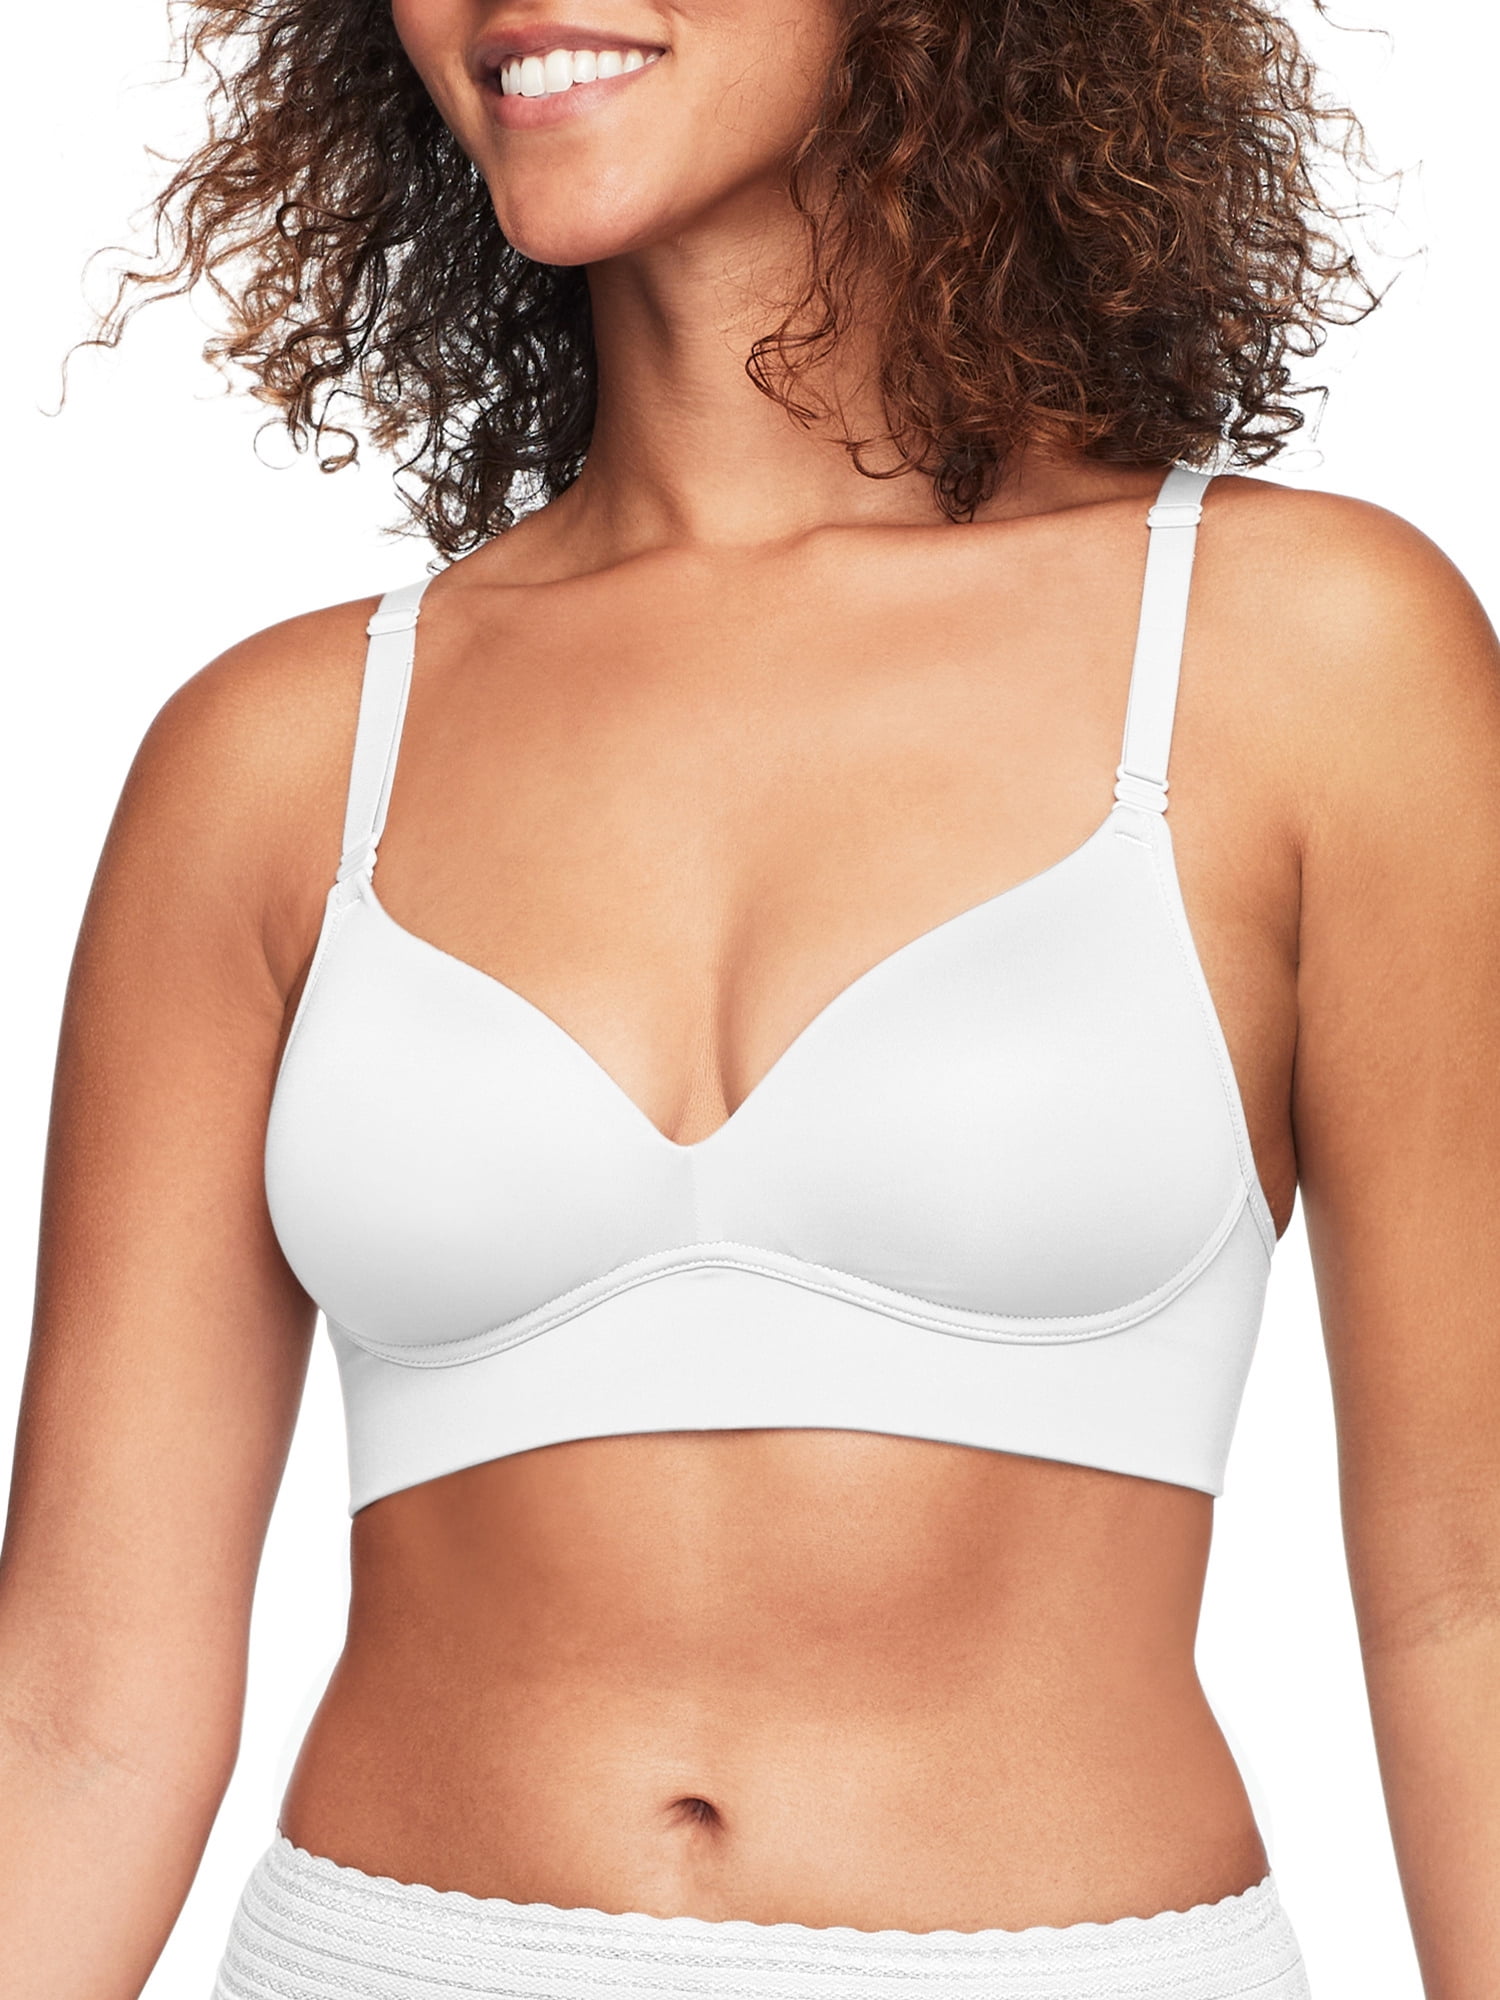 Today's bra review: Warner's® Elements of Bliss® Wire-Free Front Close Racerback  Bra